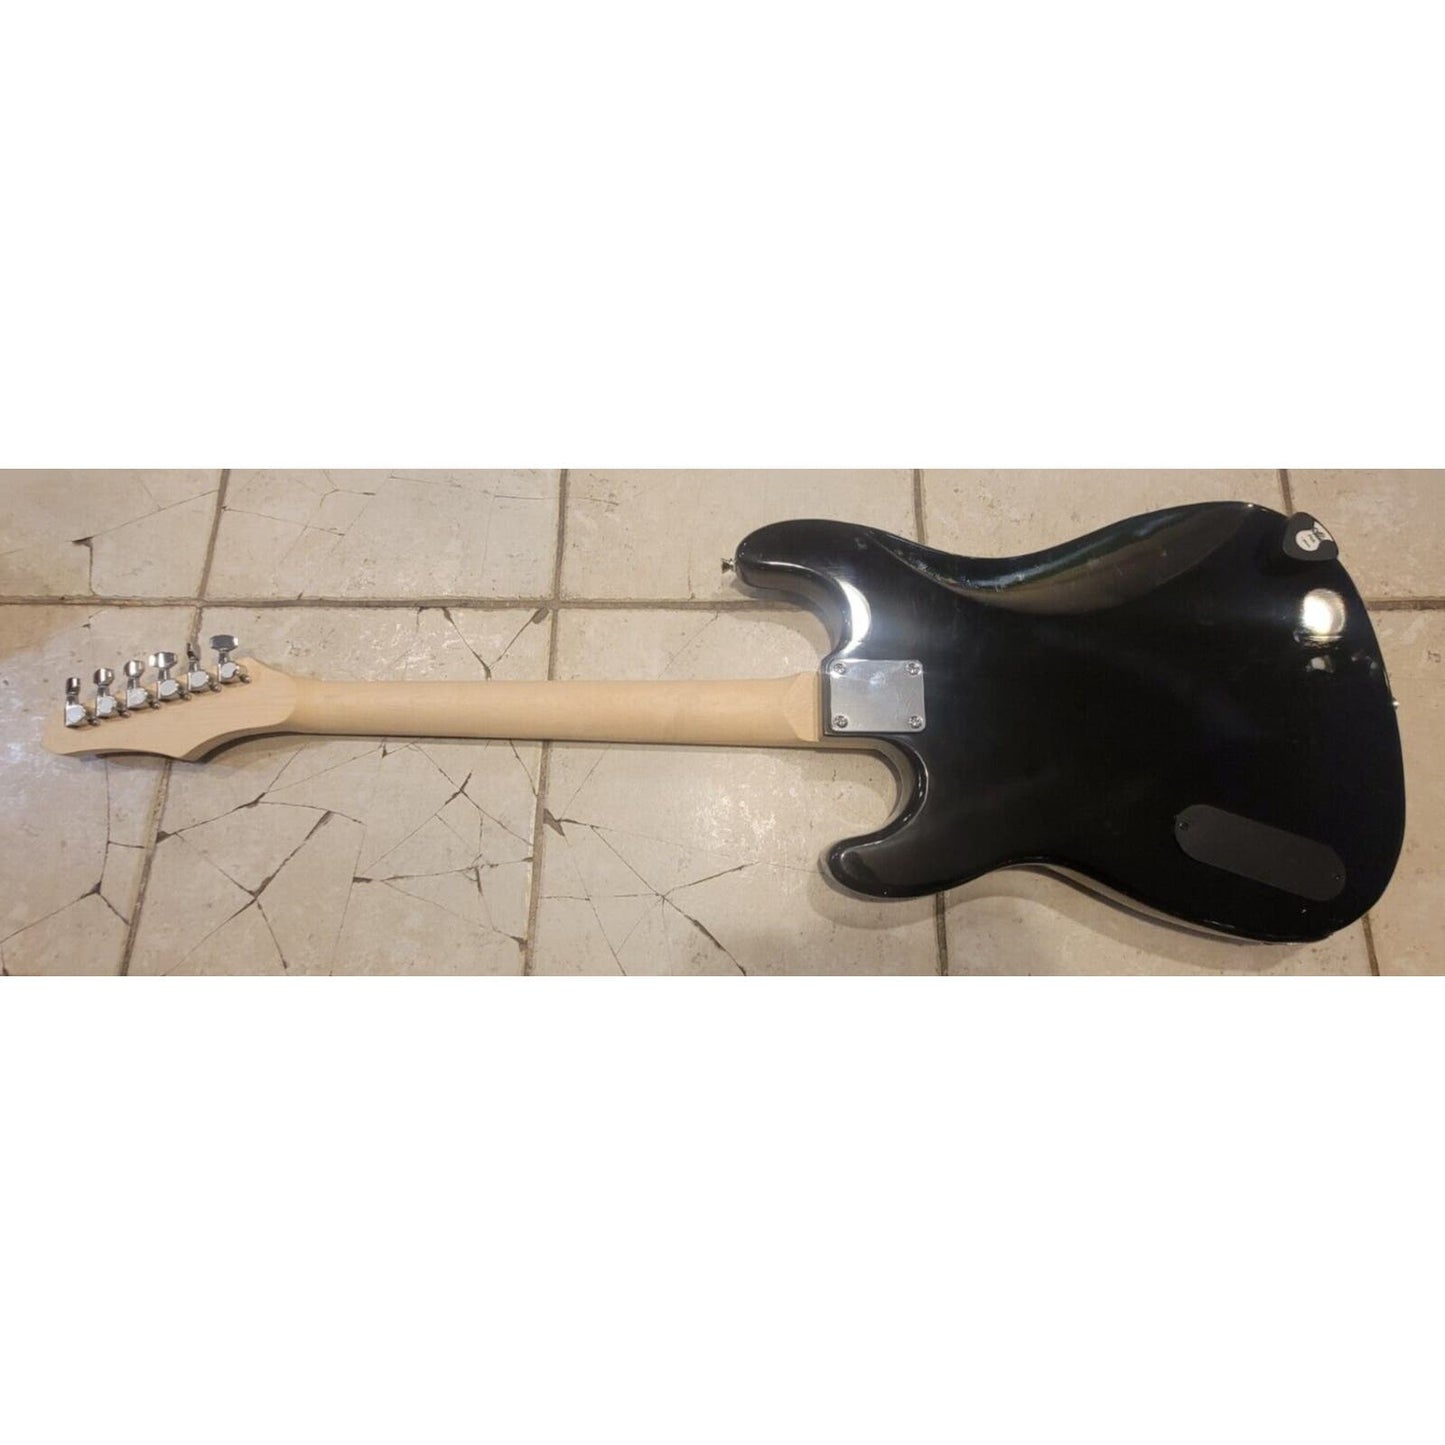 39" Full Size Electric Guitar - Right Handed Beginner Electric Guitar